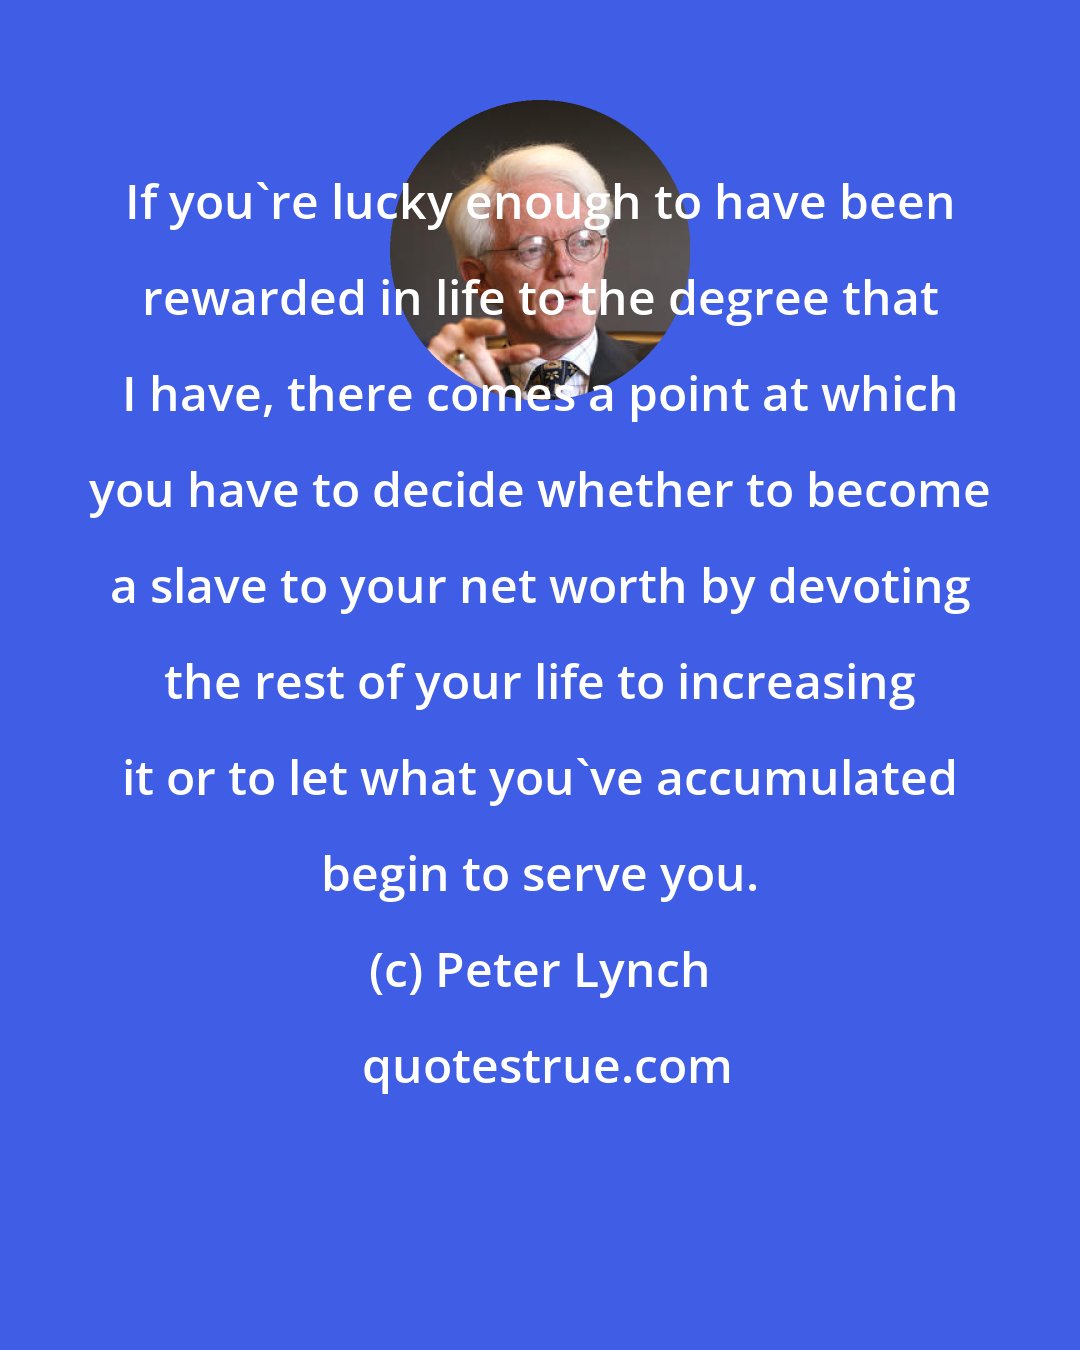 Peter Lynch: If you're lucky enough to have been rewarded in life to the degree that I have, there comes a point at which you have to decide whether to become a slave to your net worth by devoting the rest of your life to increasing it or to let what you've accumulated begin to serve you.